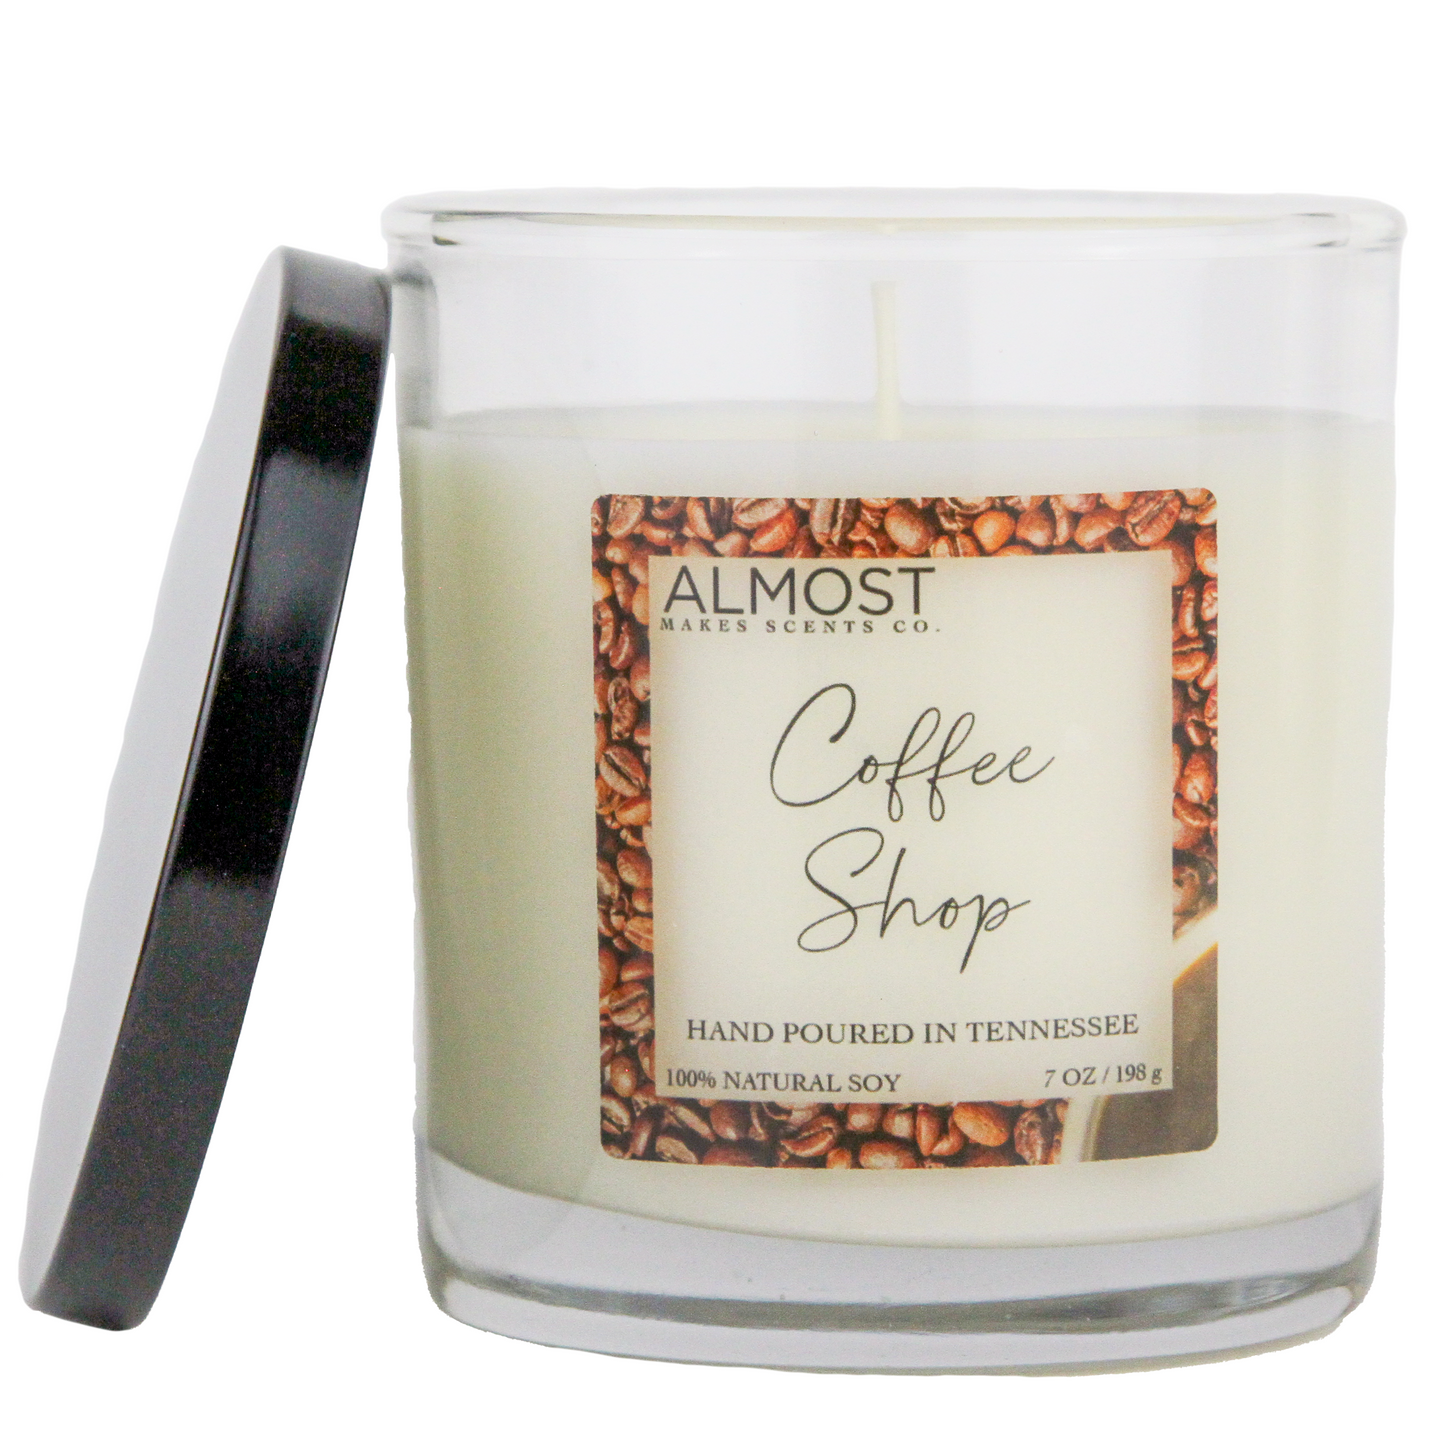 Coffee Shop Handcrafted All Soy candle 7oz